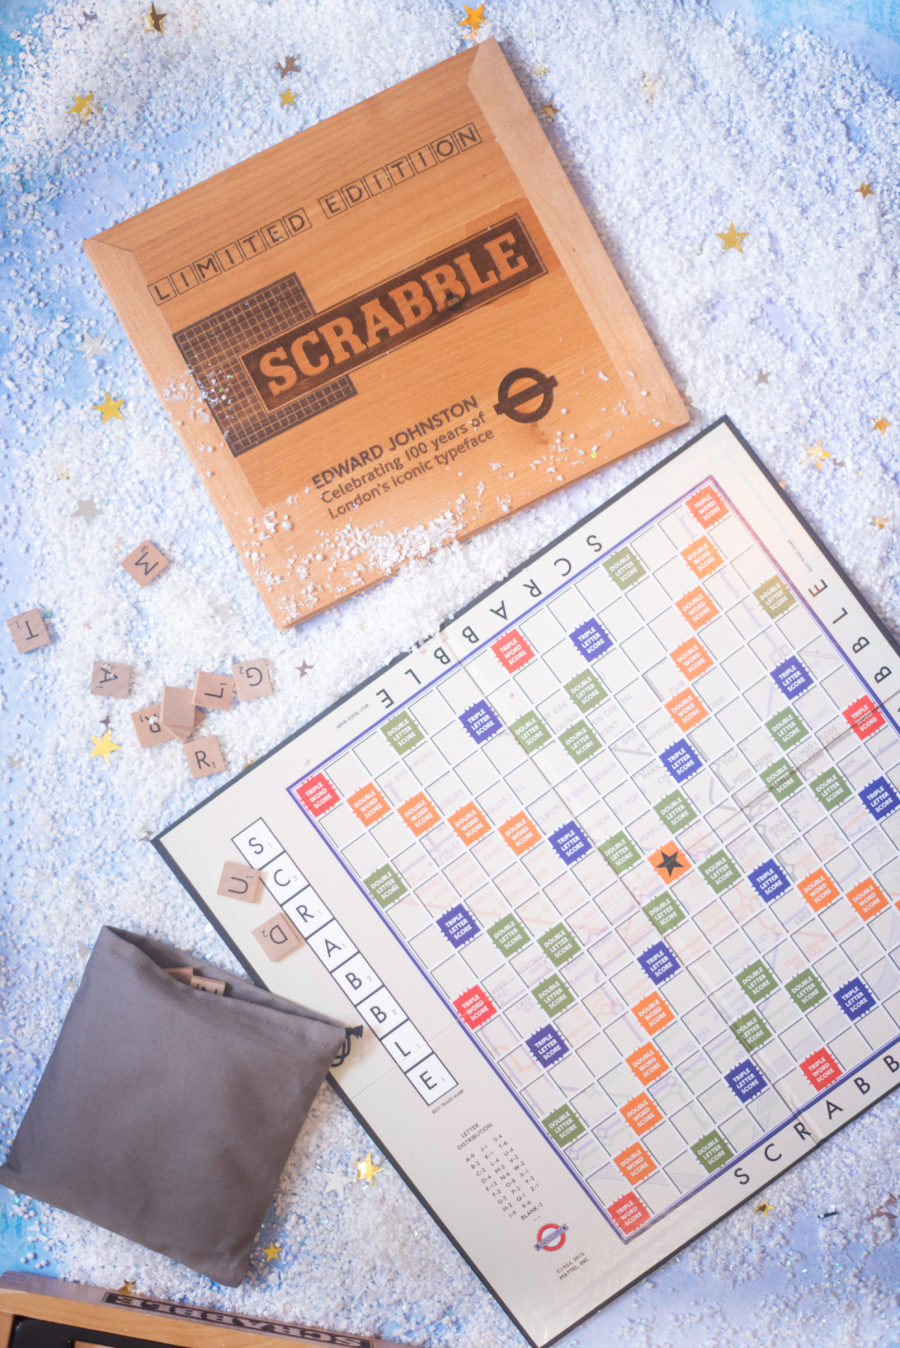 scrabble limited edition london transport edition game